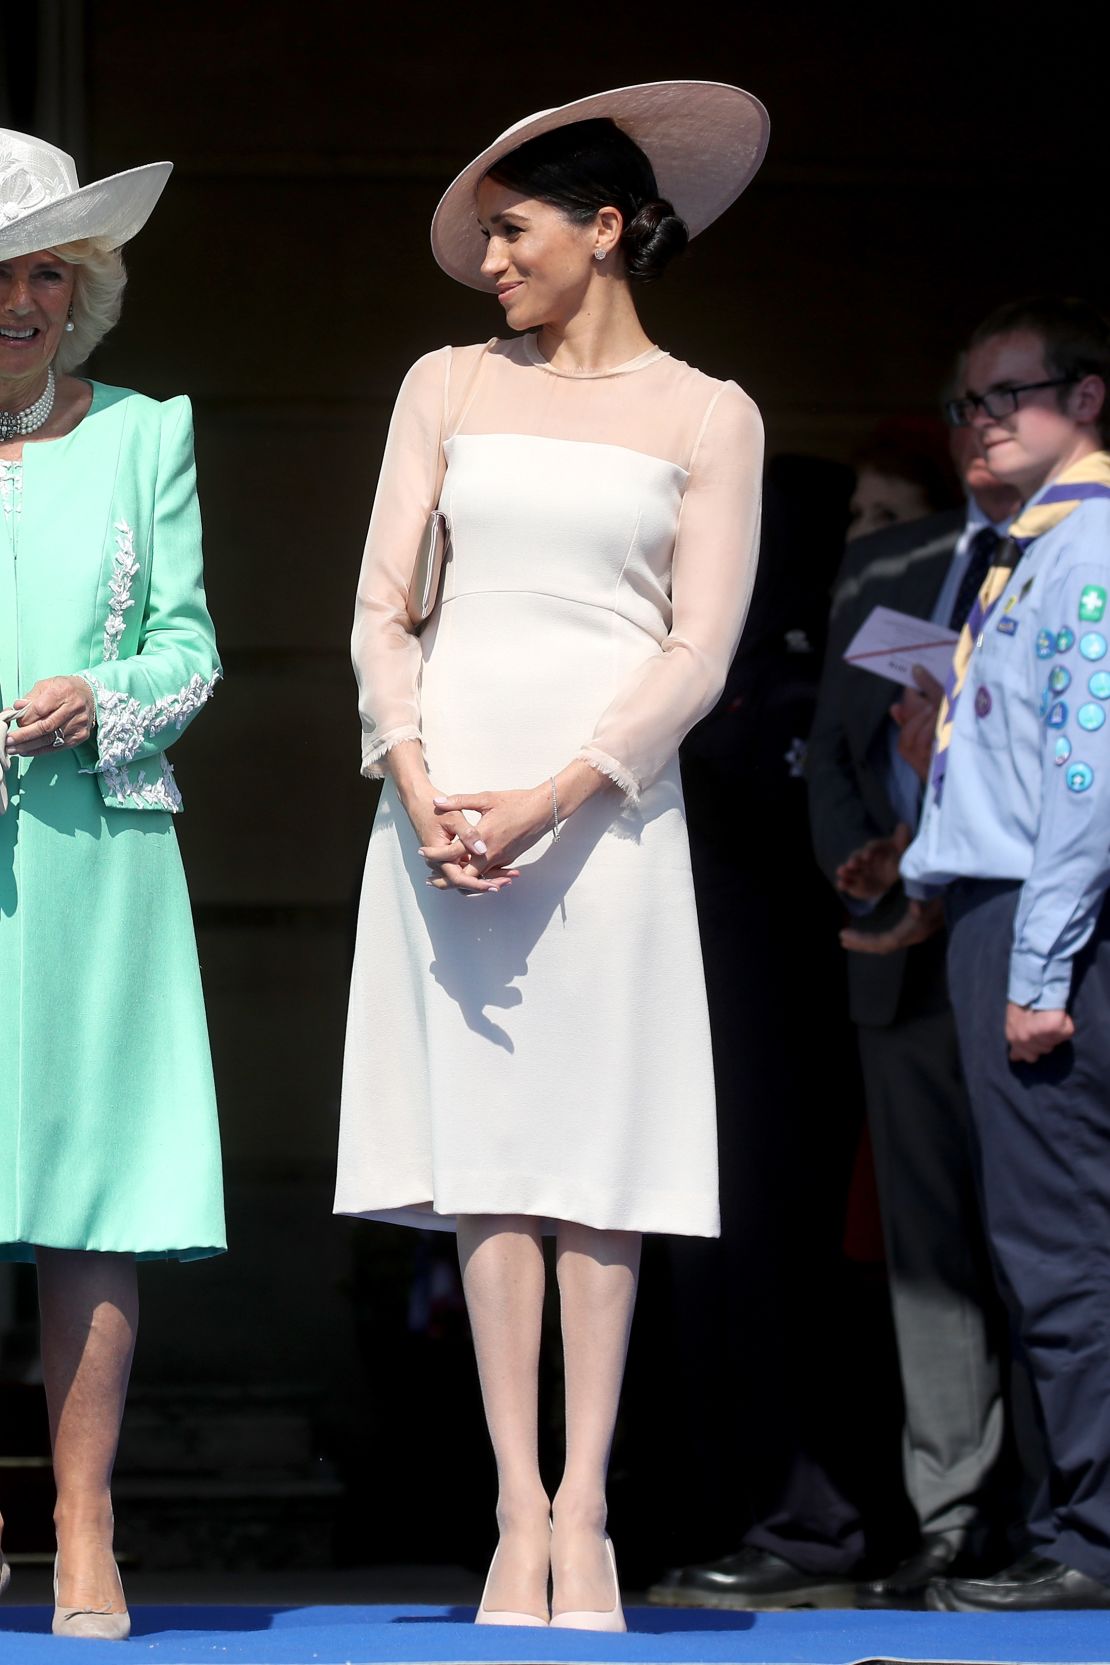 Meghan, Duchess of Sussex at the Prince of Wales' 70th Birthday Patronage Celebration in 2018.